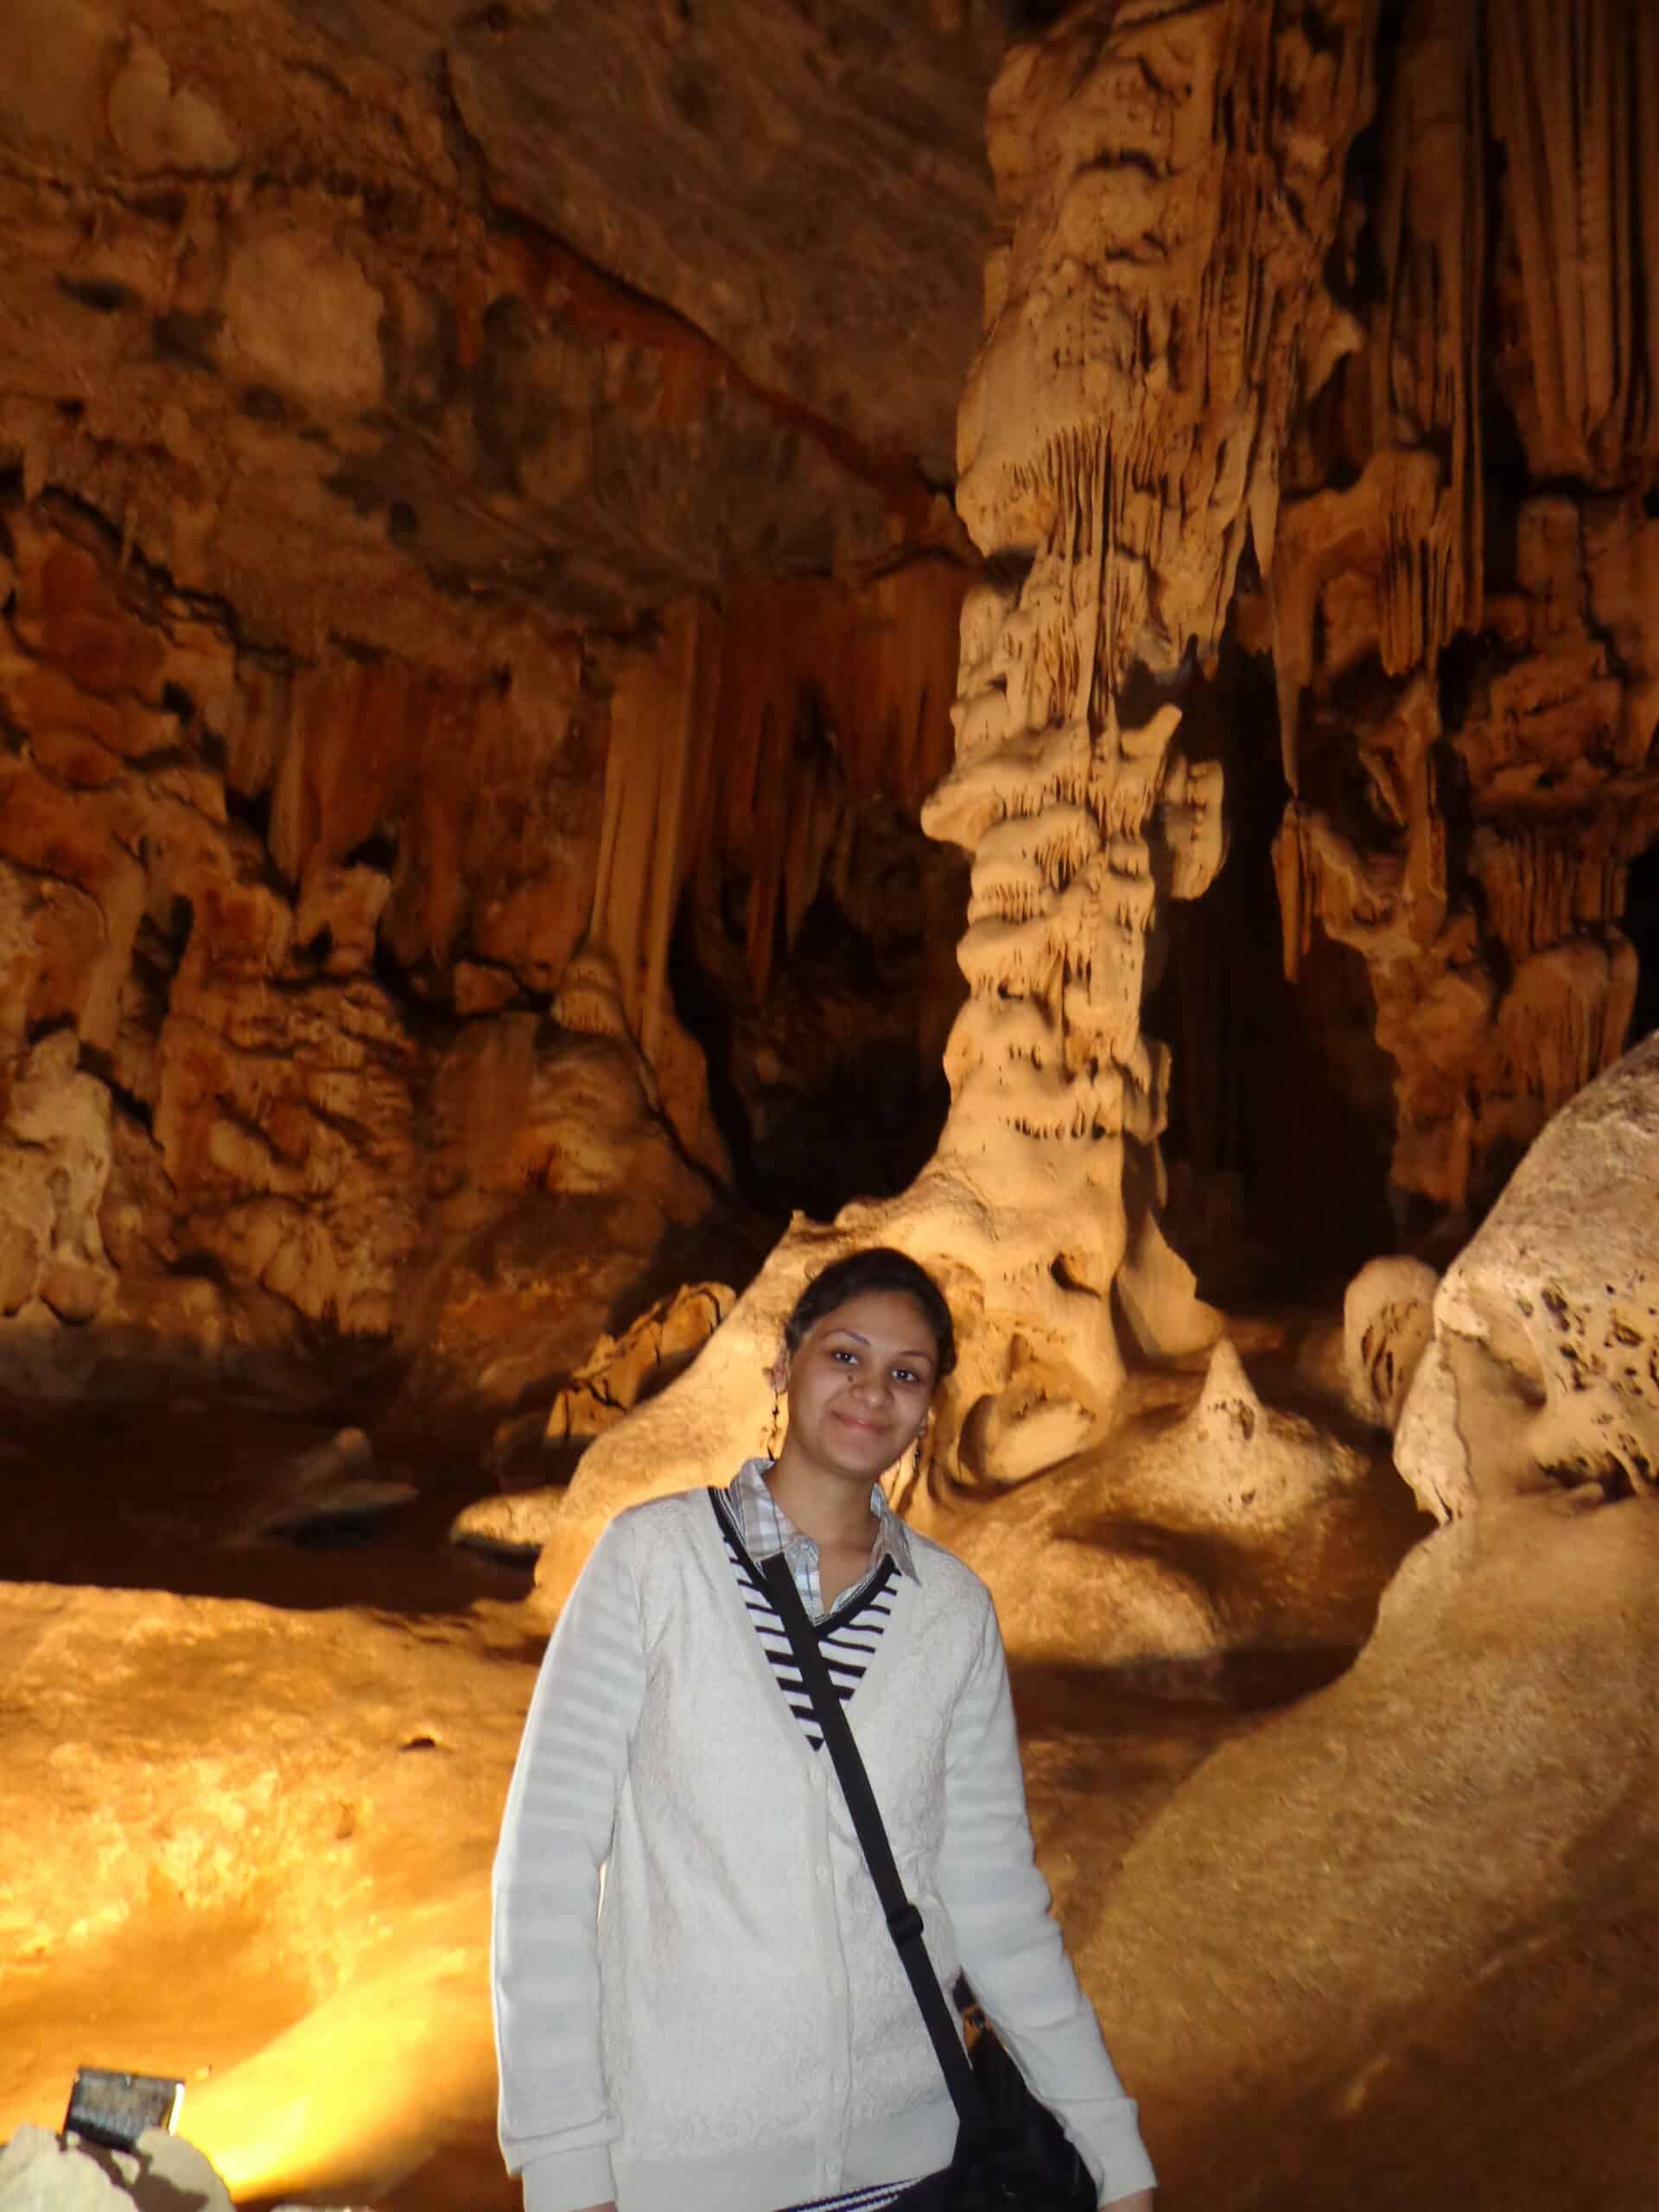 GROOVING INSIDE THE CANGO CAVES